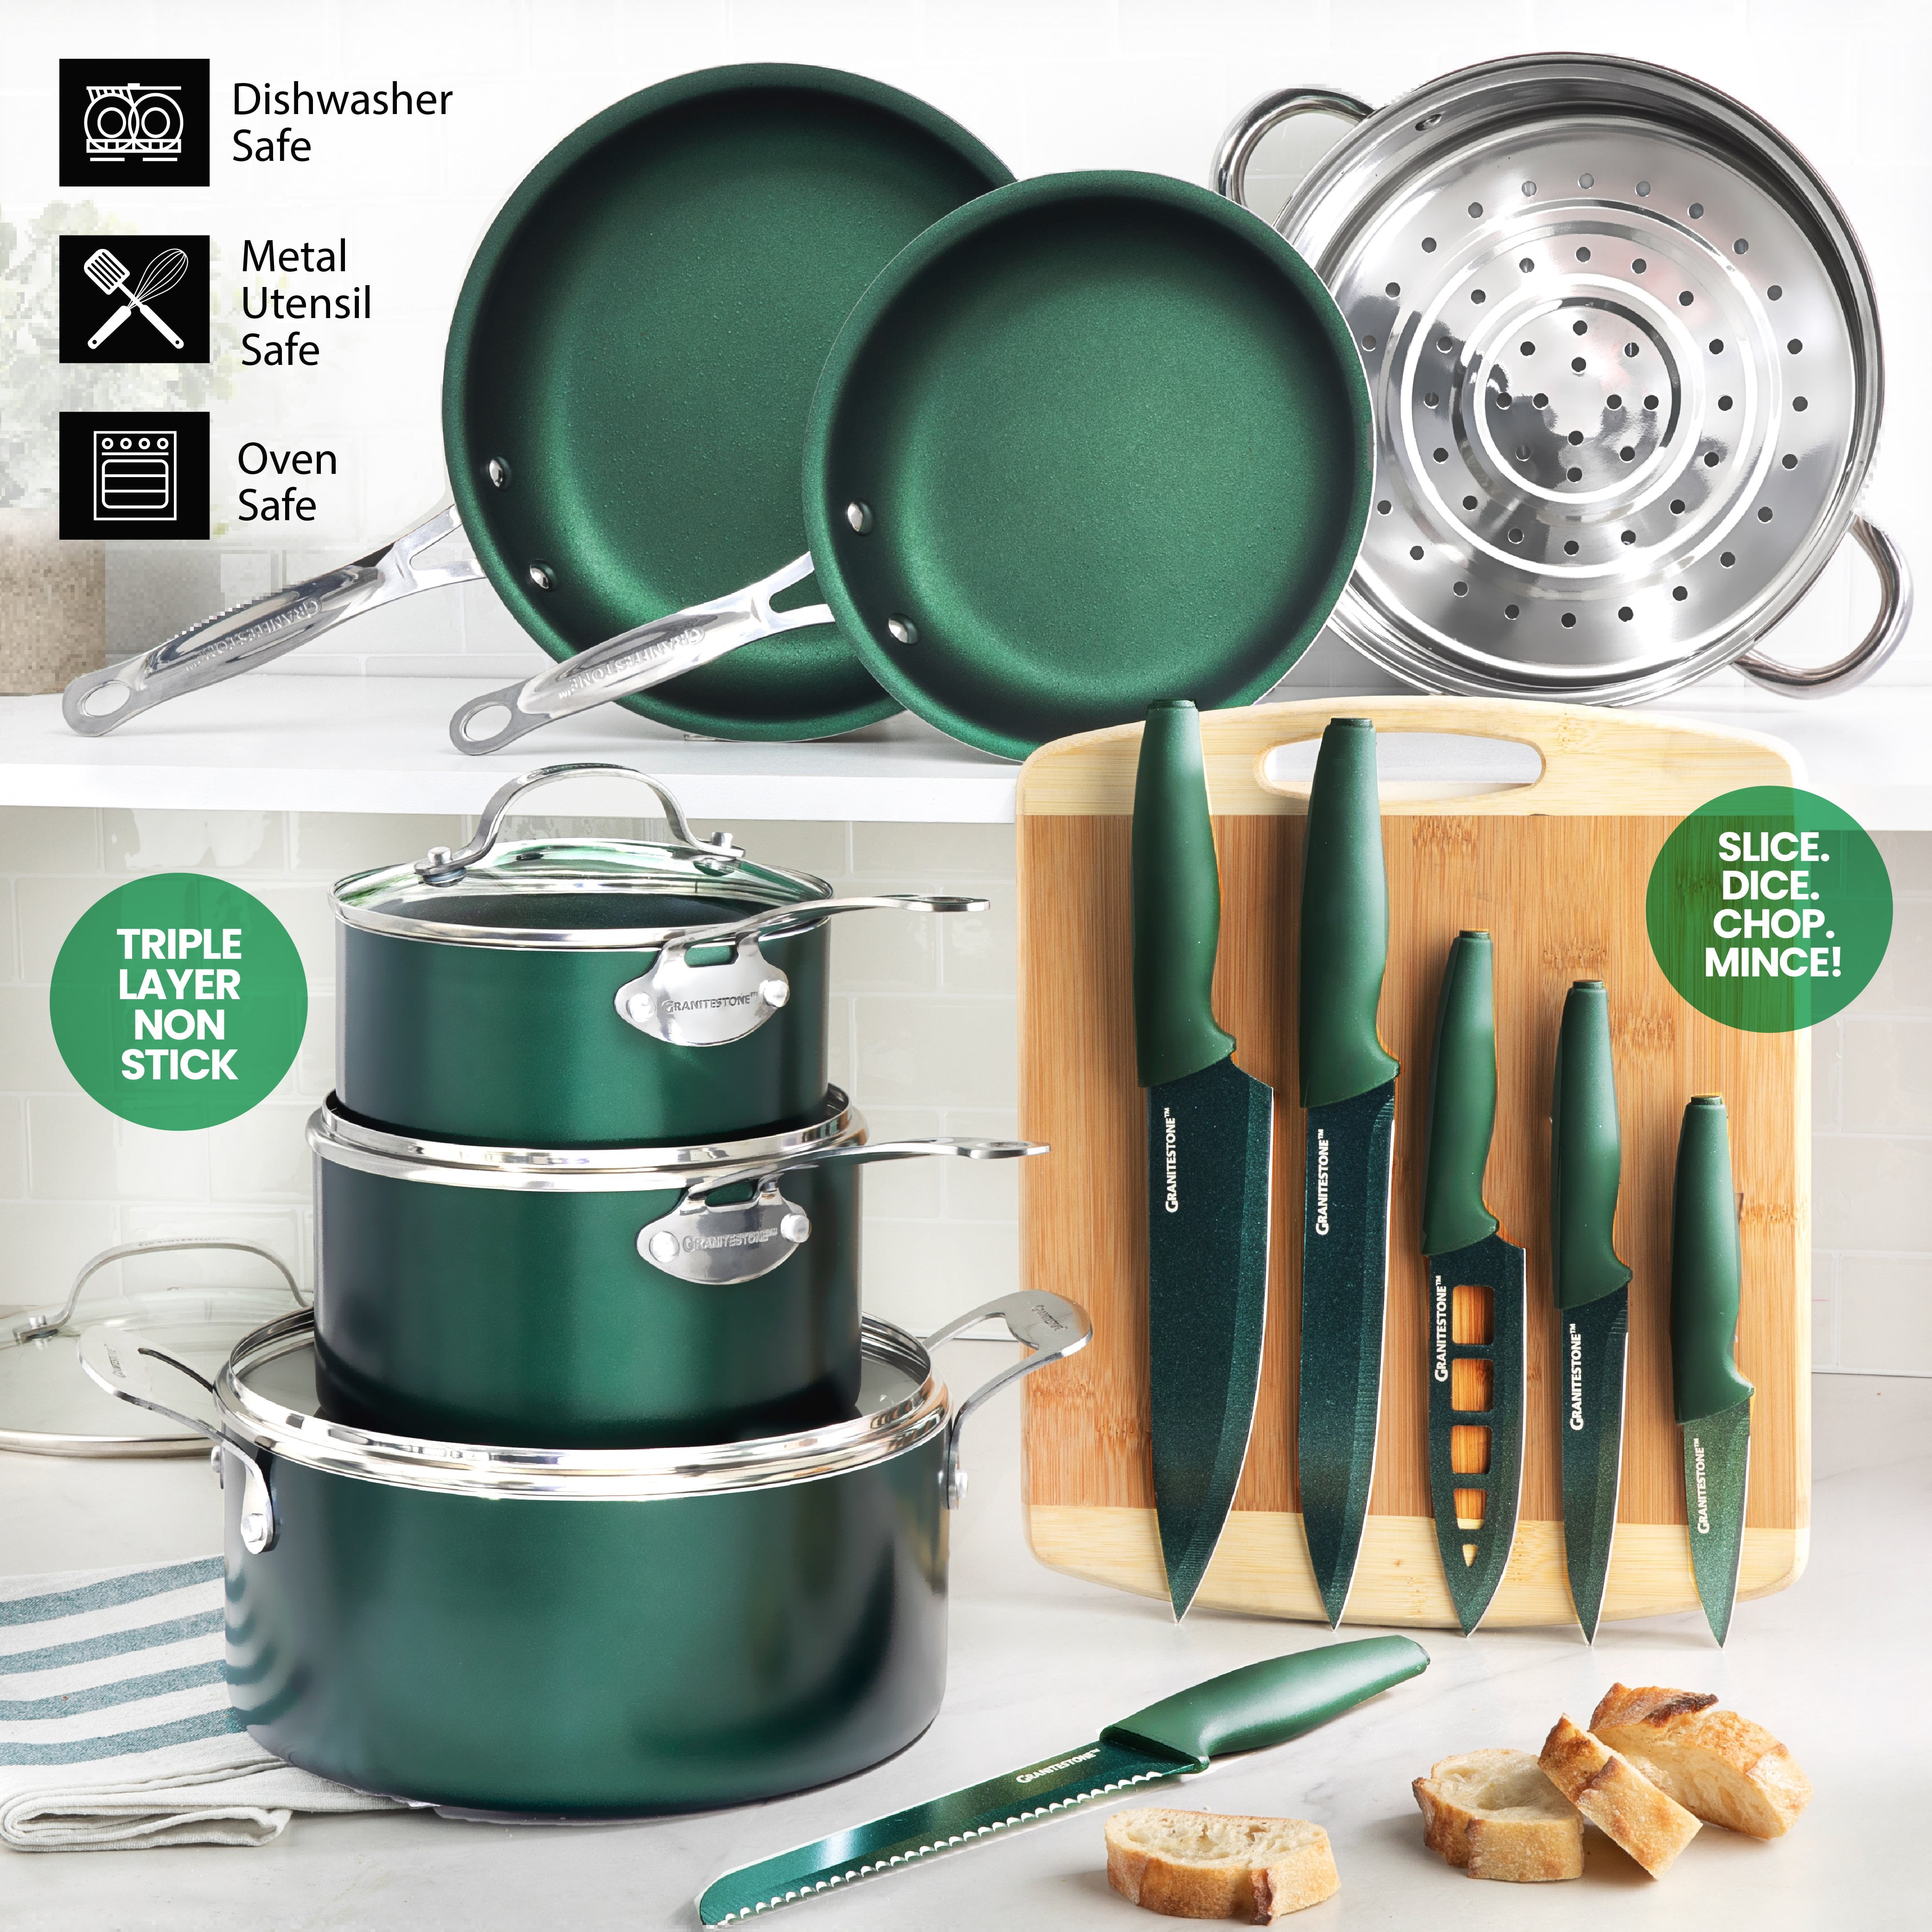  Granitestone Diamond Granite Stone Classic Emerald Pots and Pans  Set with Ultra Nonstick Durable Mineral & Diamond Tripple Coated Surface,  Stainless Steel Stay Cool Handles, 10 Piece Cookware, Green…: Home 